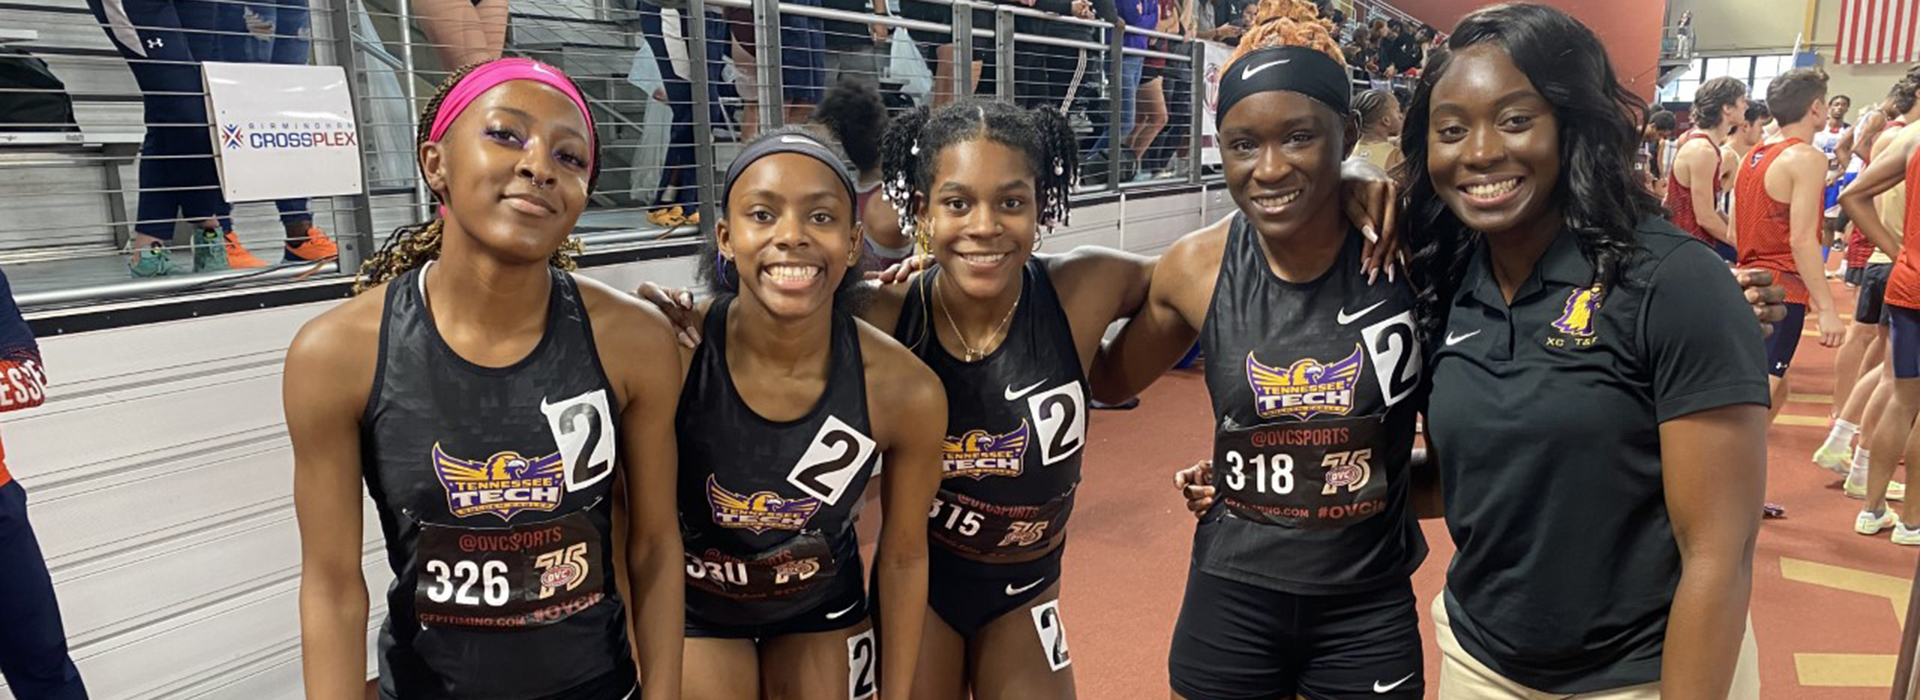 Tech turns in fourth-place finish at OVC Indoor Track & Field Championships